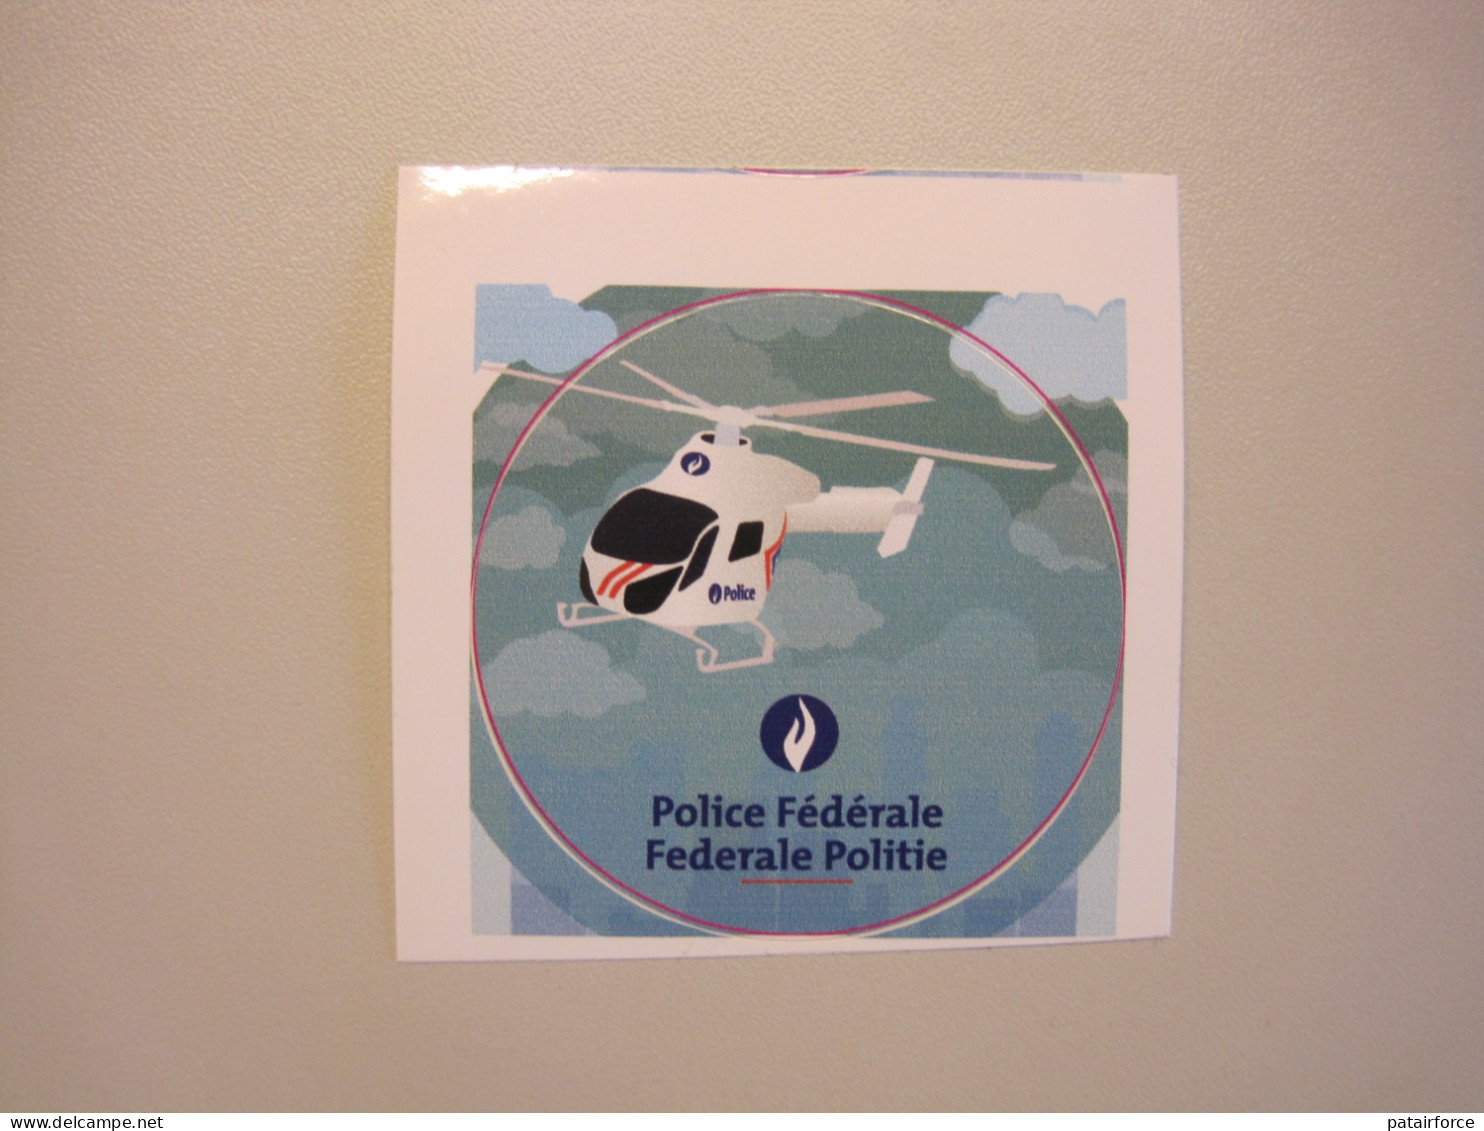 Sticker Helikopter Politie - Police Helicopter - Policia